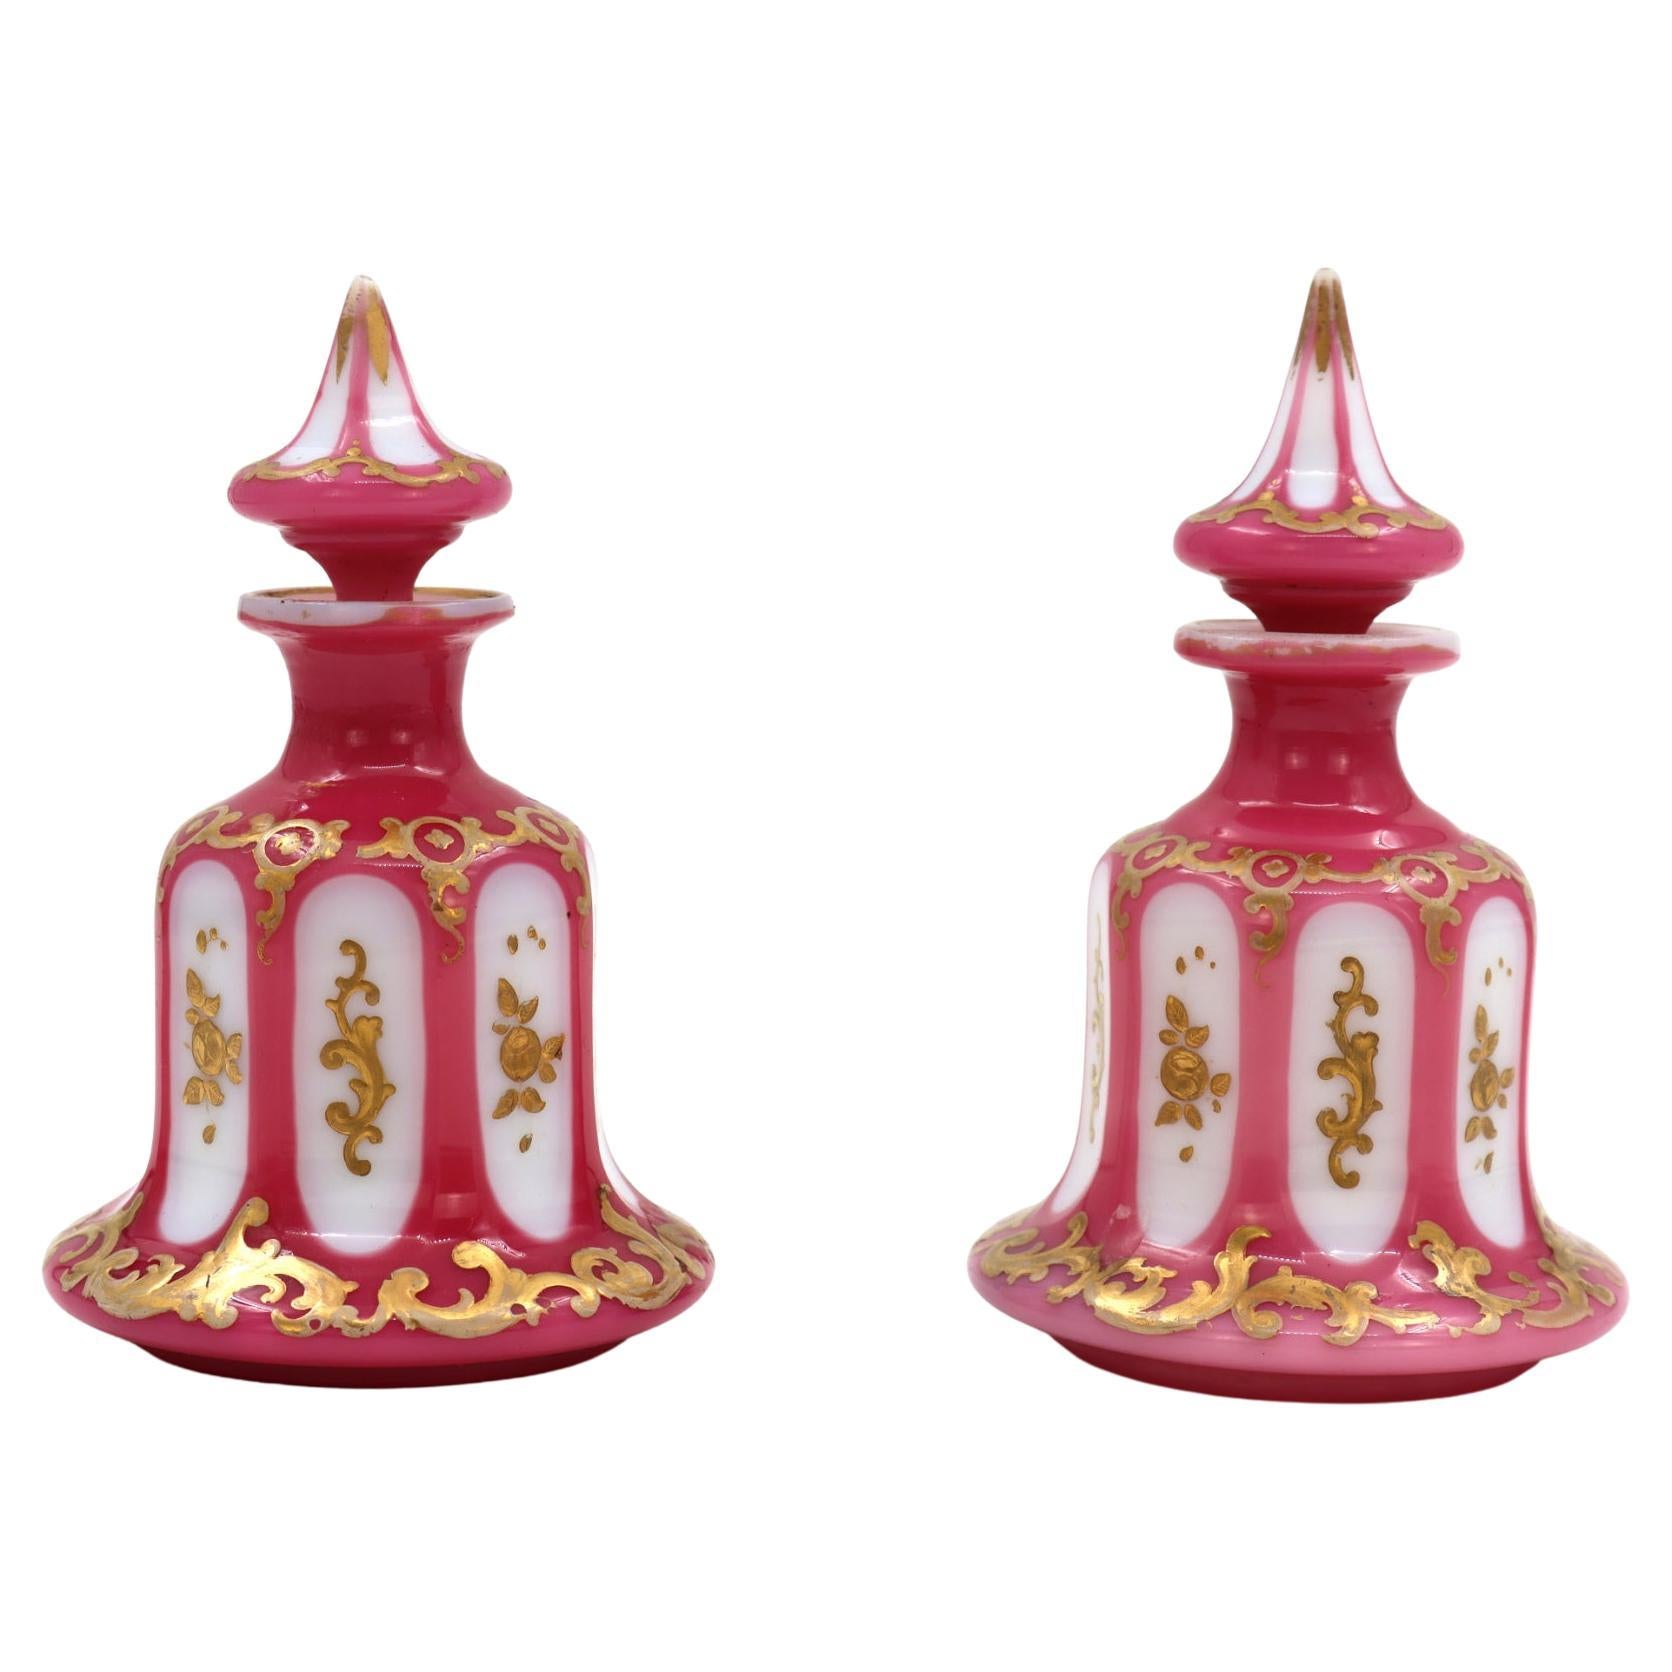 Pair of White Opaline and Pink Overlay Perfume Bottles